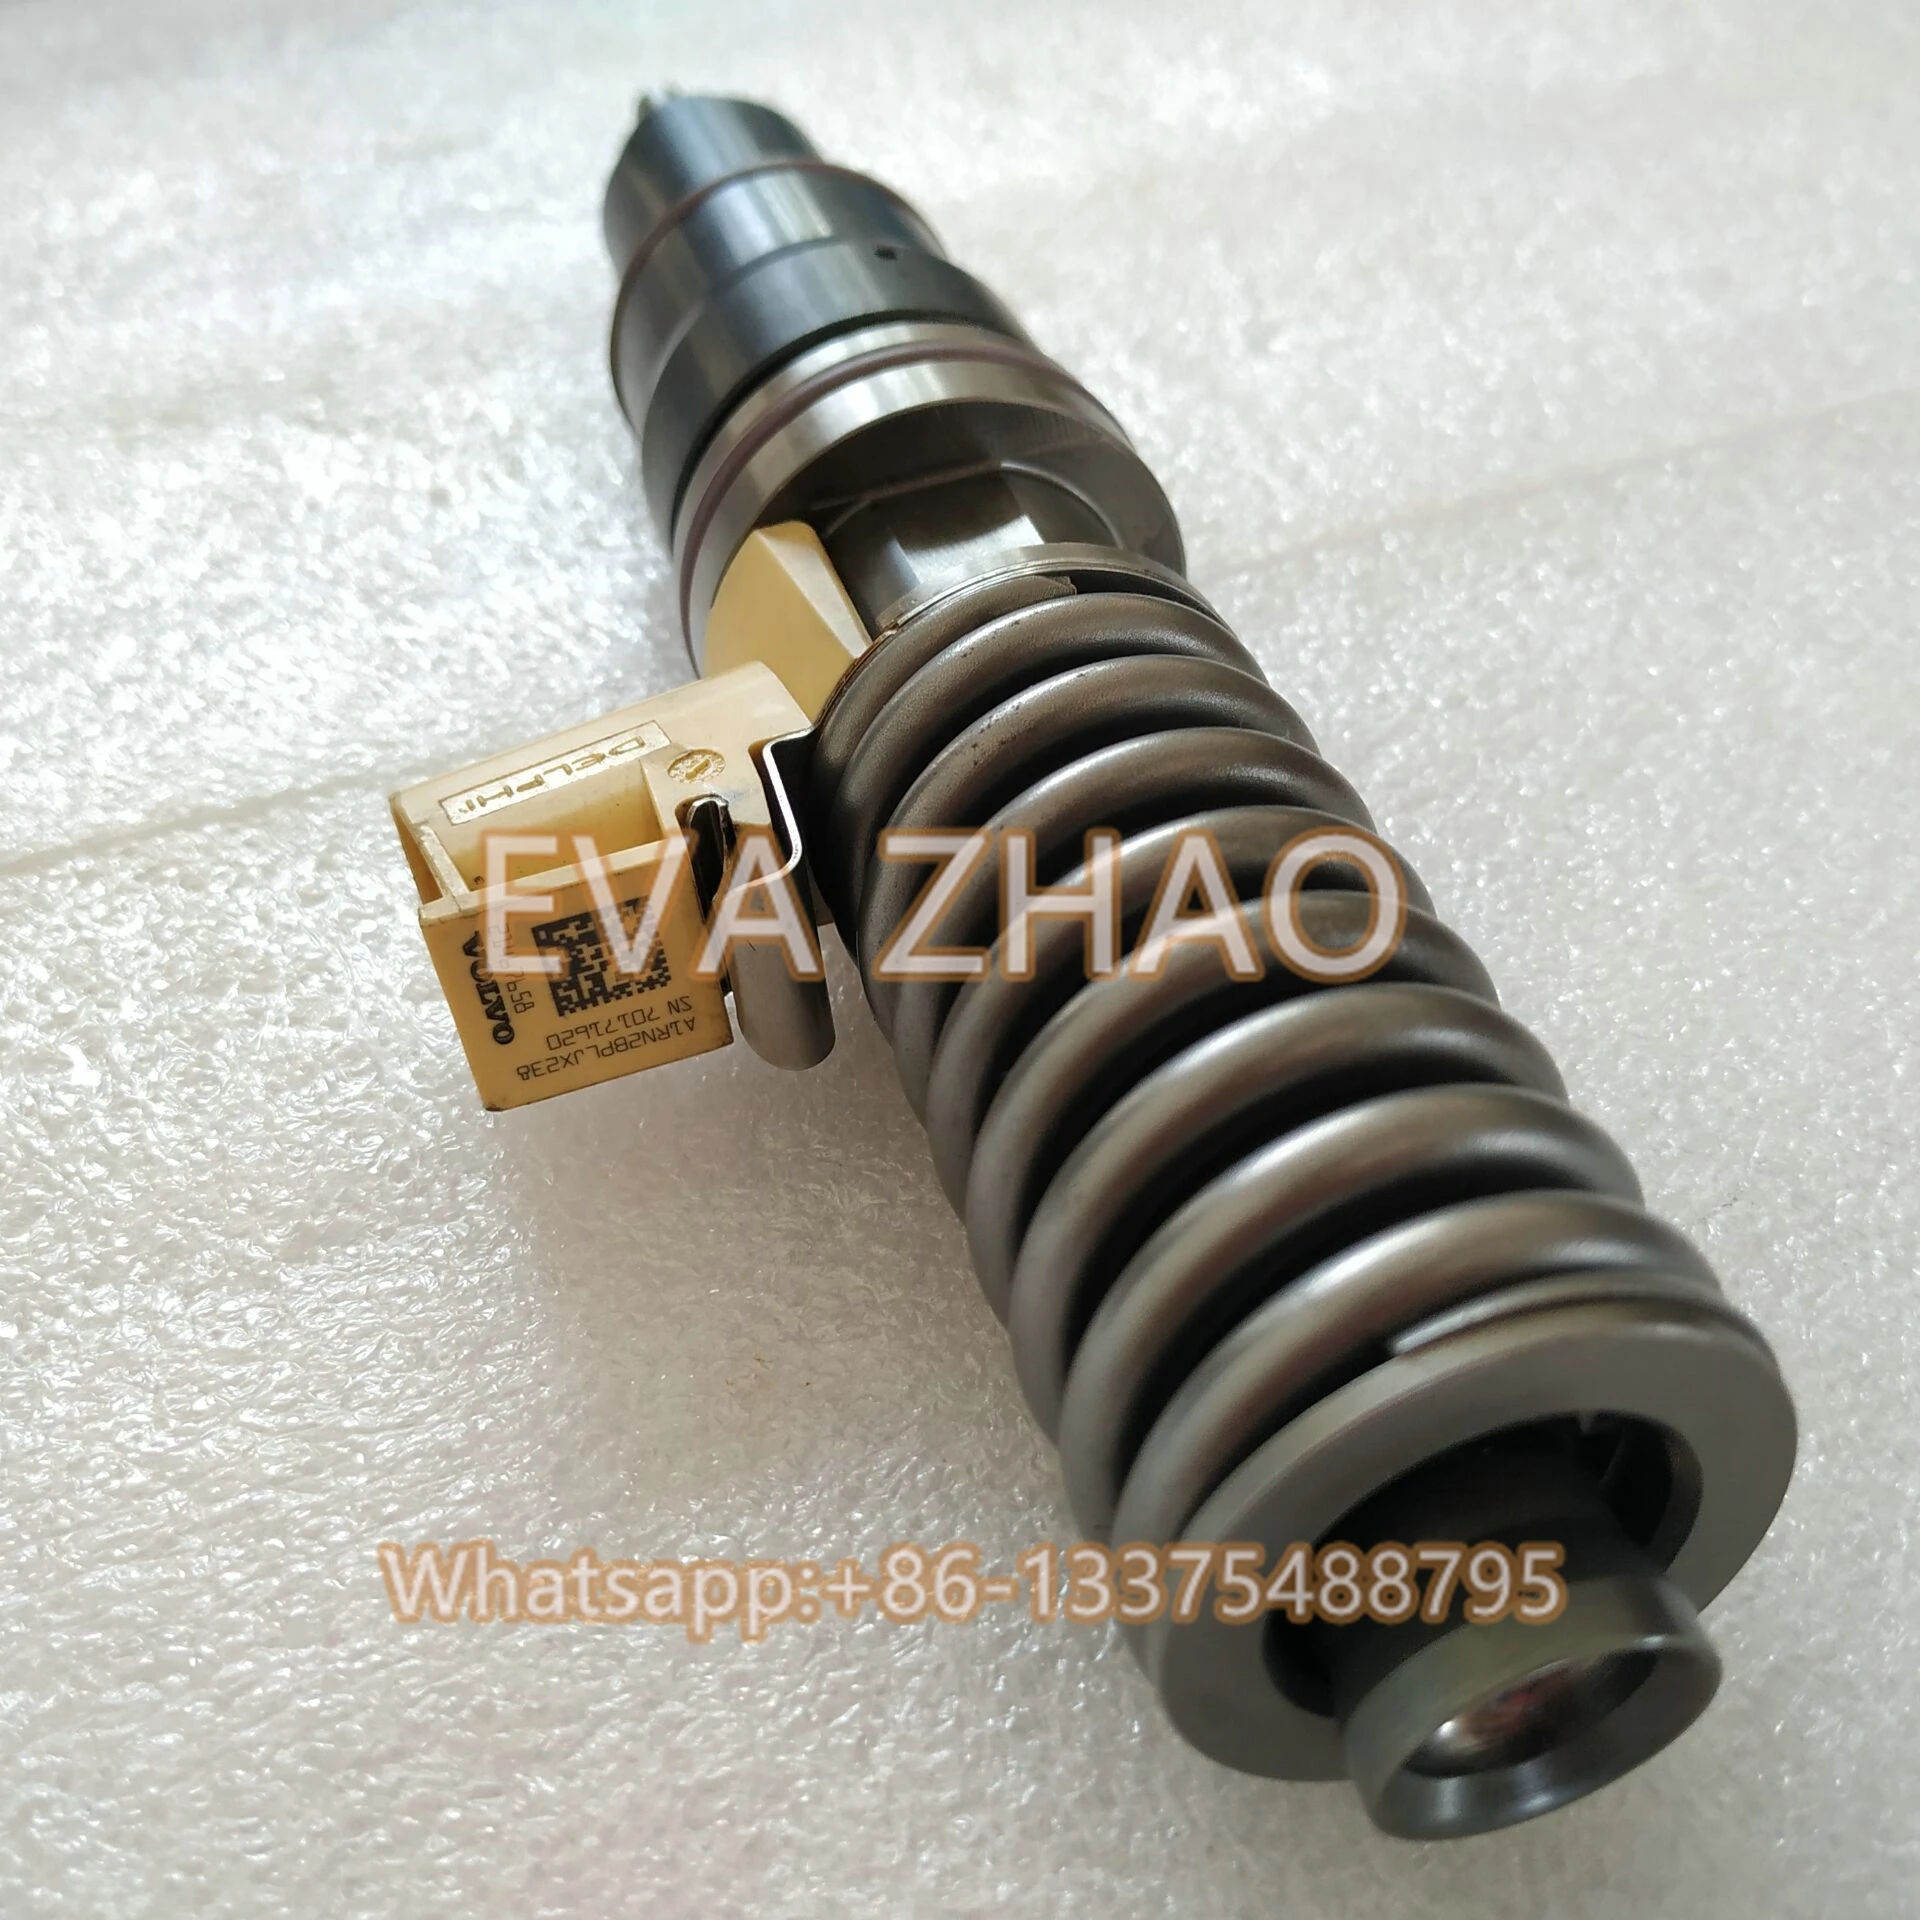 Injector 21467658 Bebe4g14001 For Engine Md11p3472 Renew Model - Buy  Bebe4g14001,21467658,28277576 Product on Alibaba.com